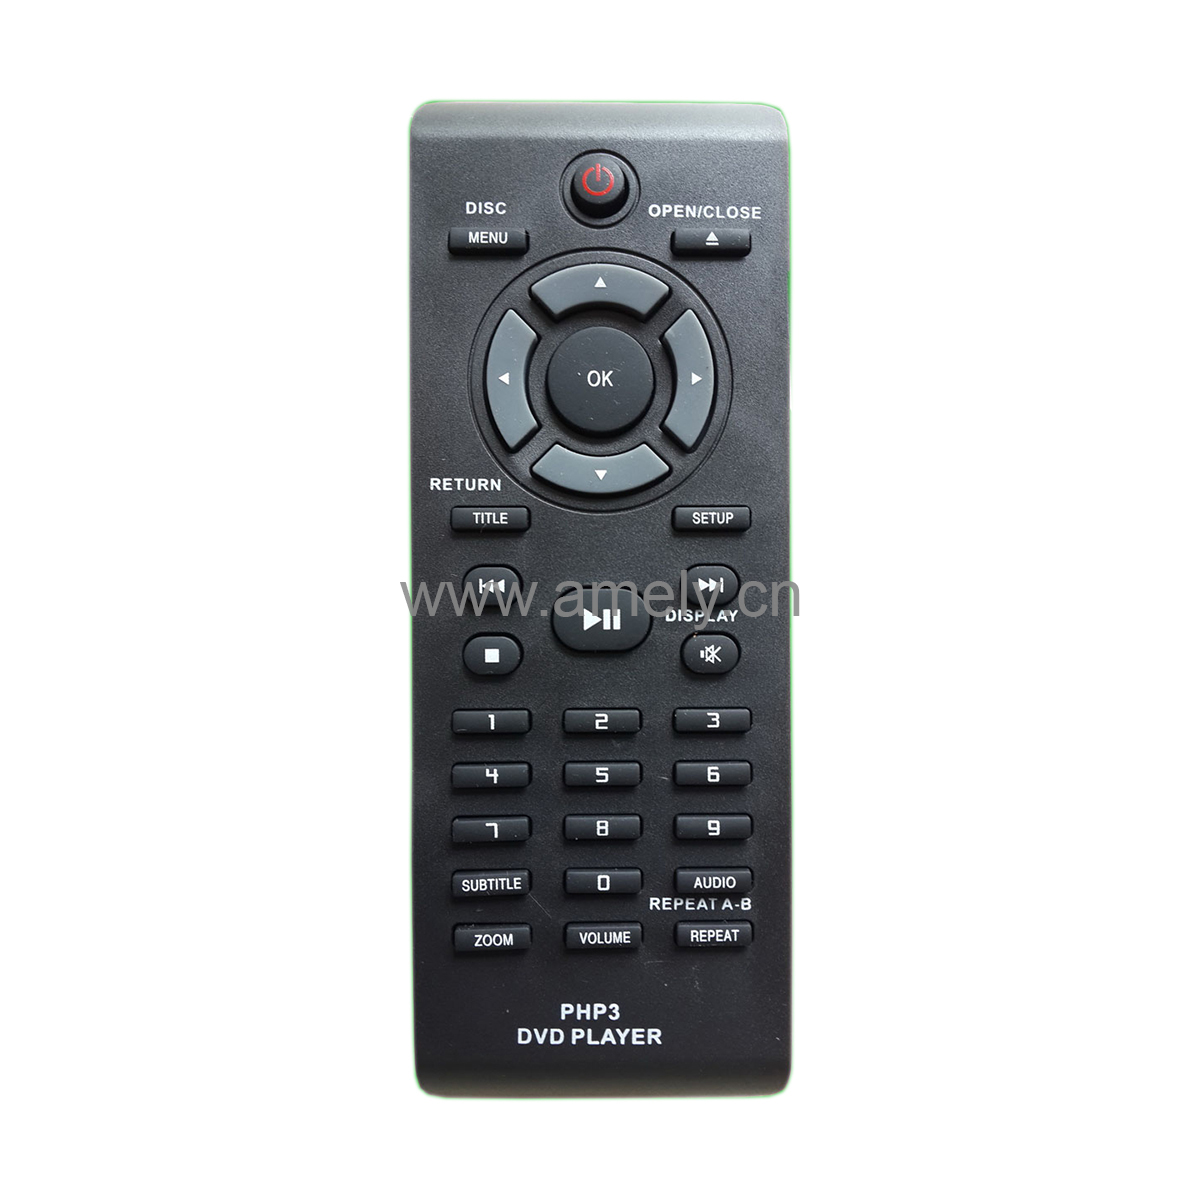 Us 1 8 Php3 Dvd Player Ad Ph64 Use For Philips Dvd Tv Remote Control China Aemly Electronic Co Ltd